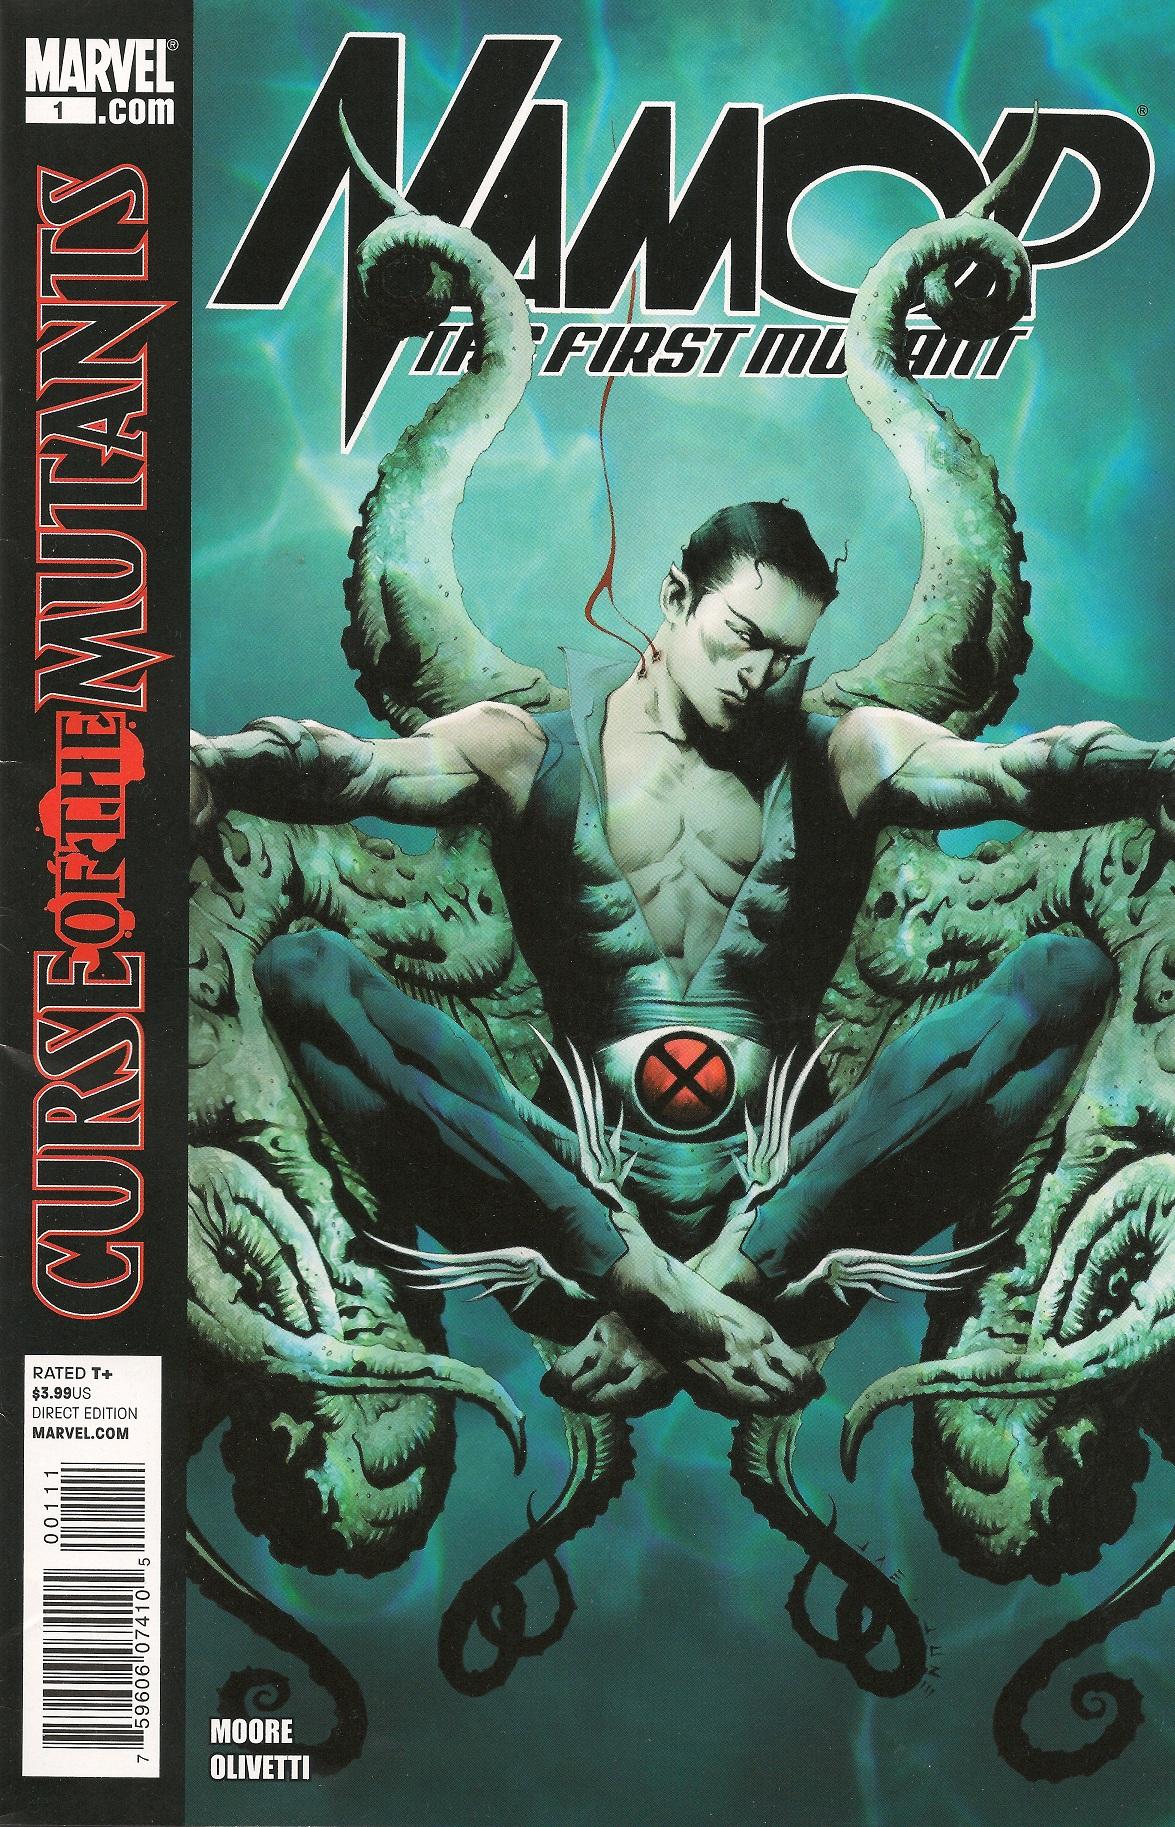 Namor: The First Mutant Vol. 1 #1